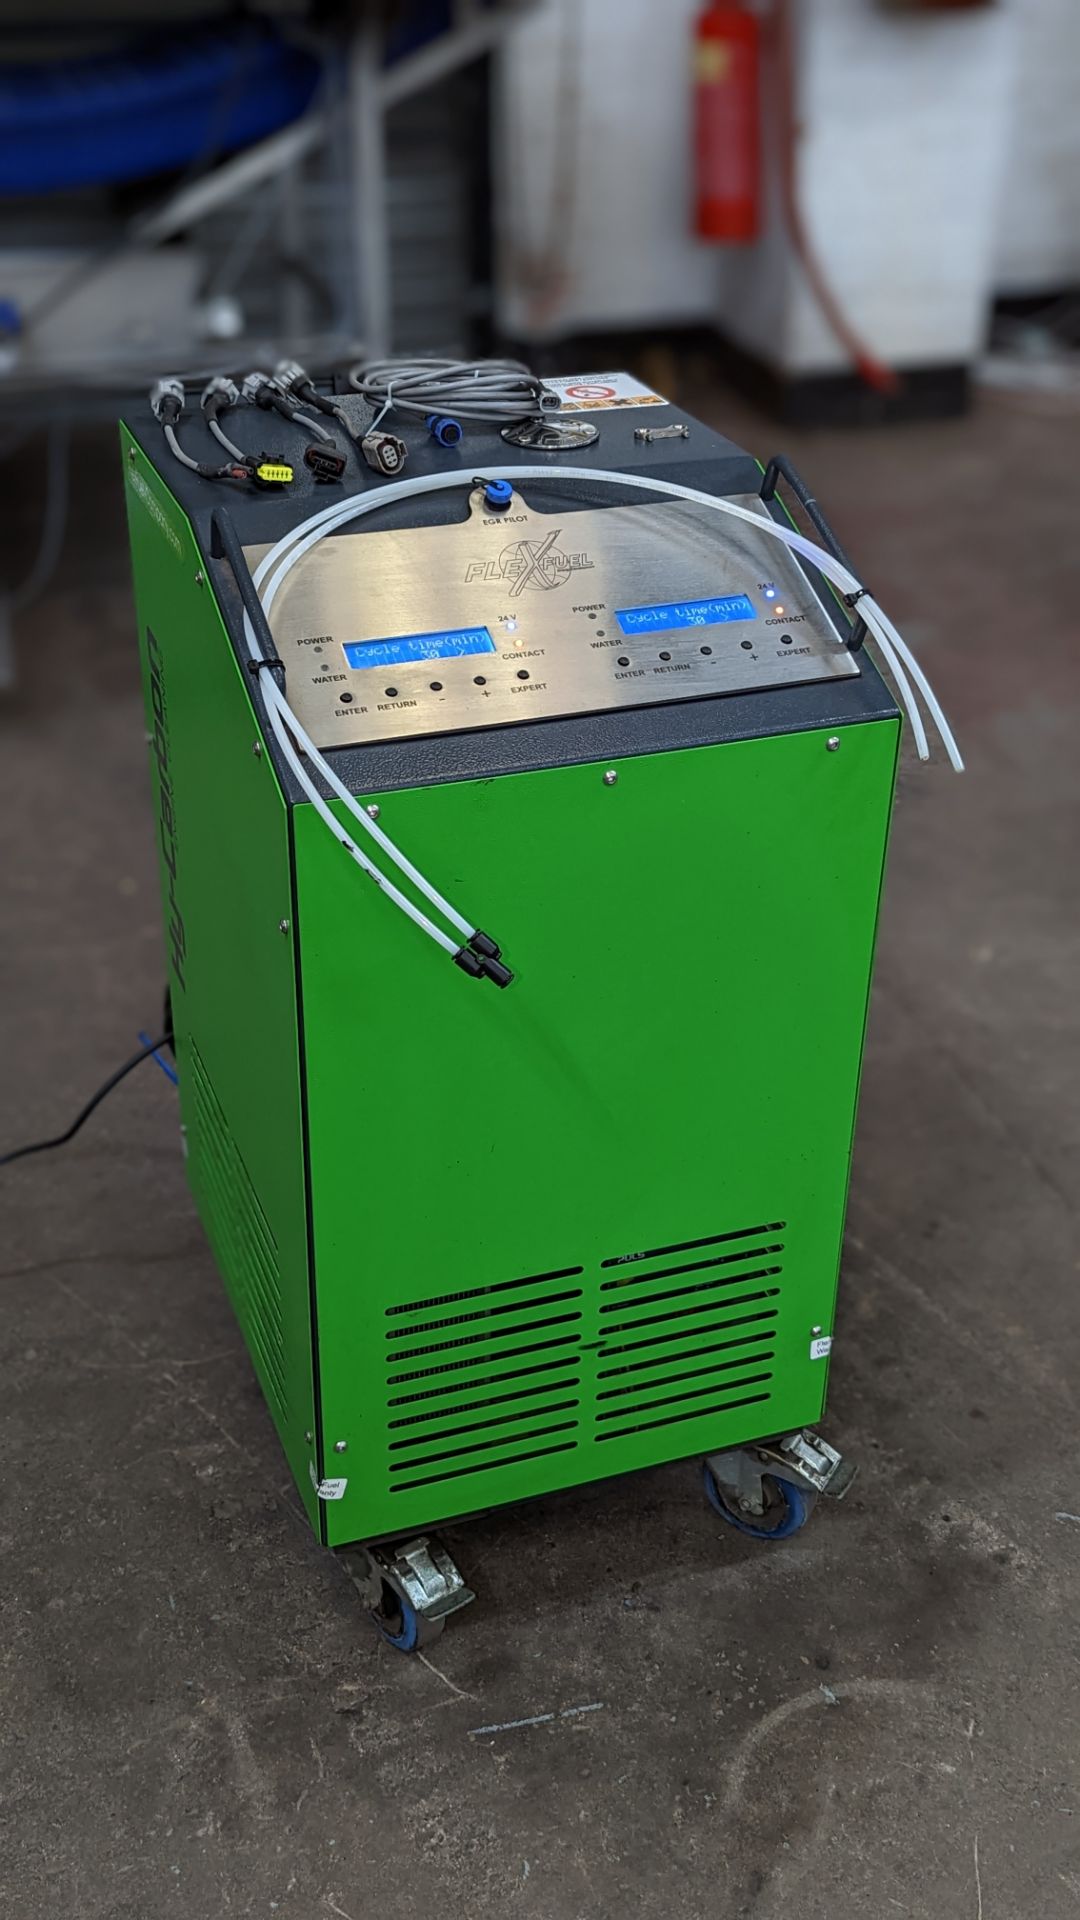 Flex Fuel Hy-Carbon EGR Pilot 1000S engine cleaning machine including cover. Purchased new in 2019 - Image 19 of 19